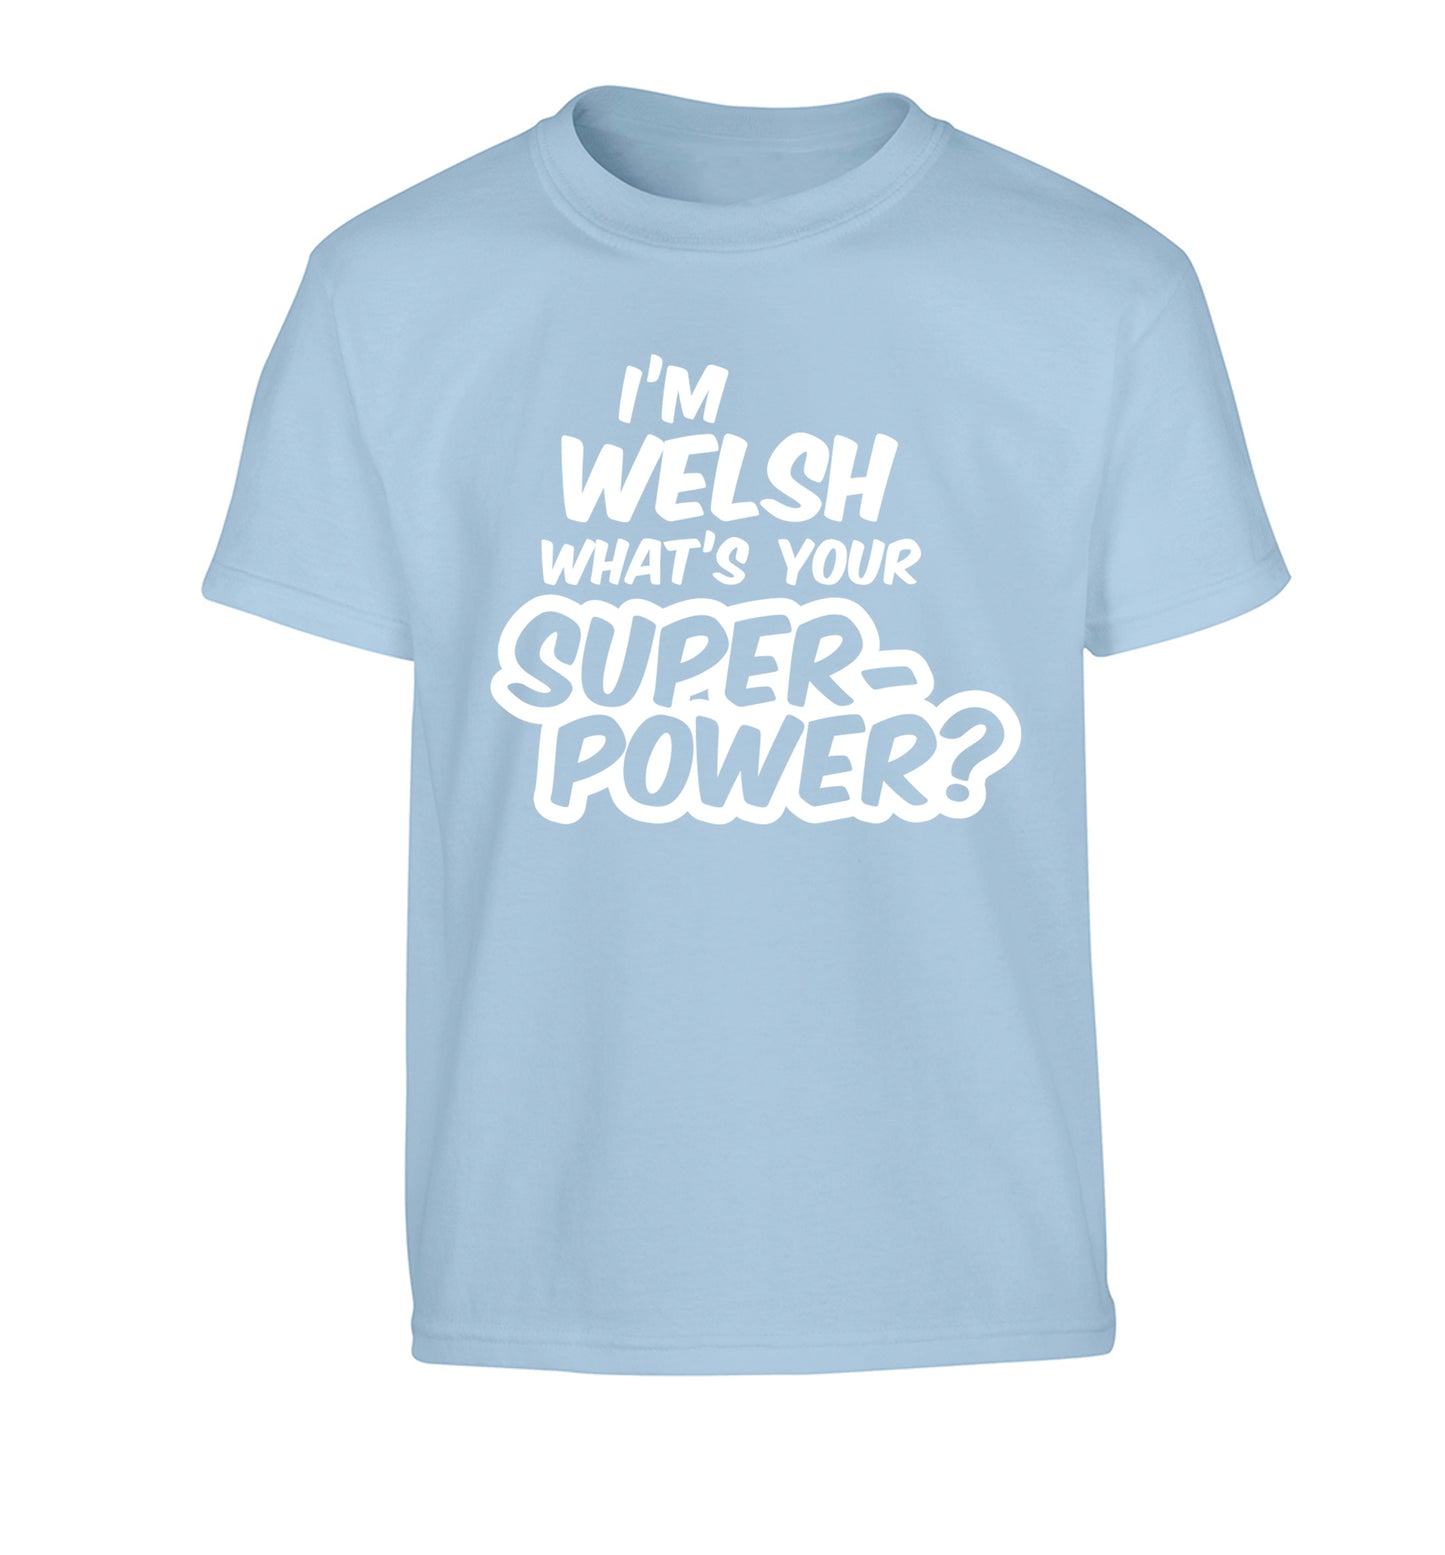 I'm Welsh what's your superpower? Children's light blue Tshirt 12-13 Years